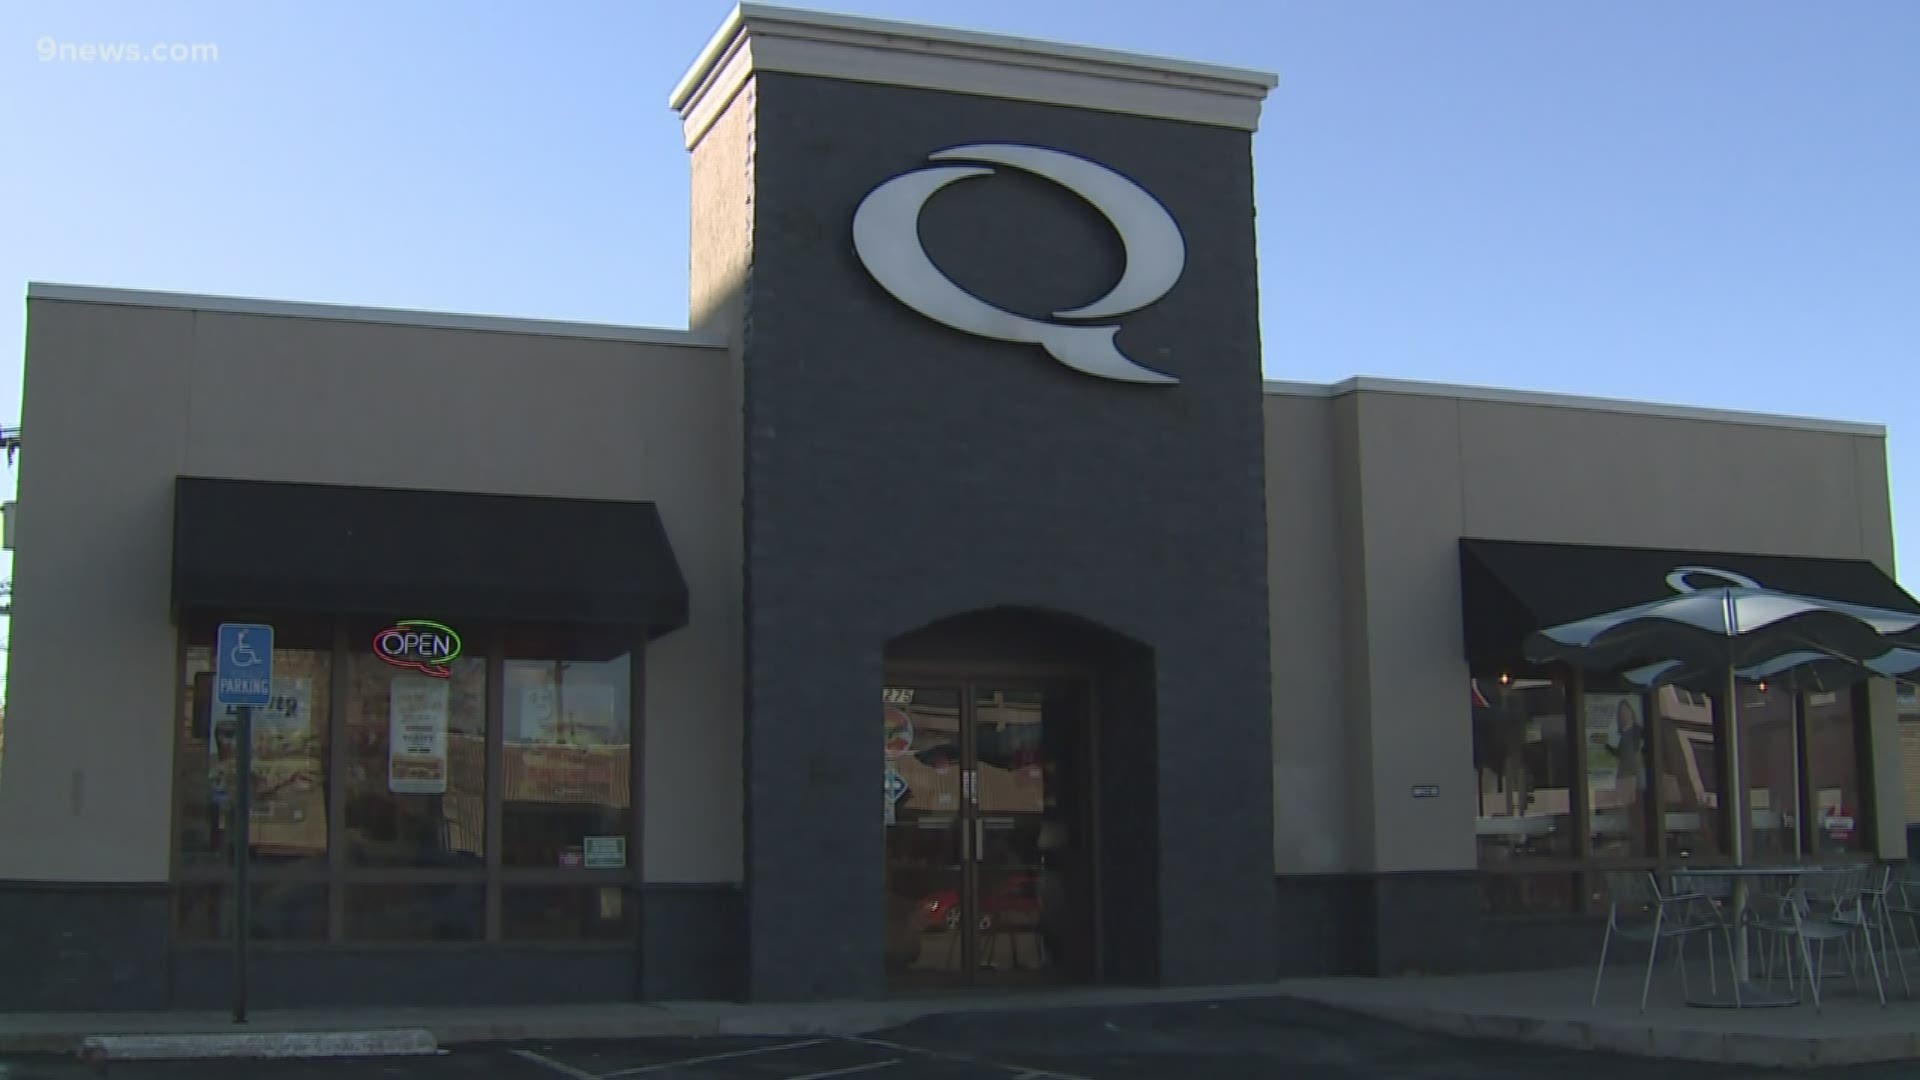 With rising costs, Quizno's spokesperson said the location could be "unsustainable."